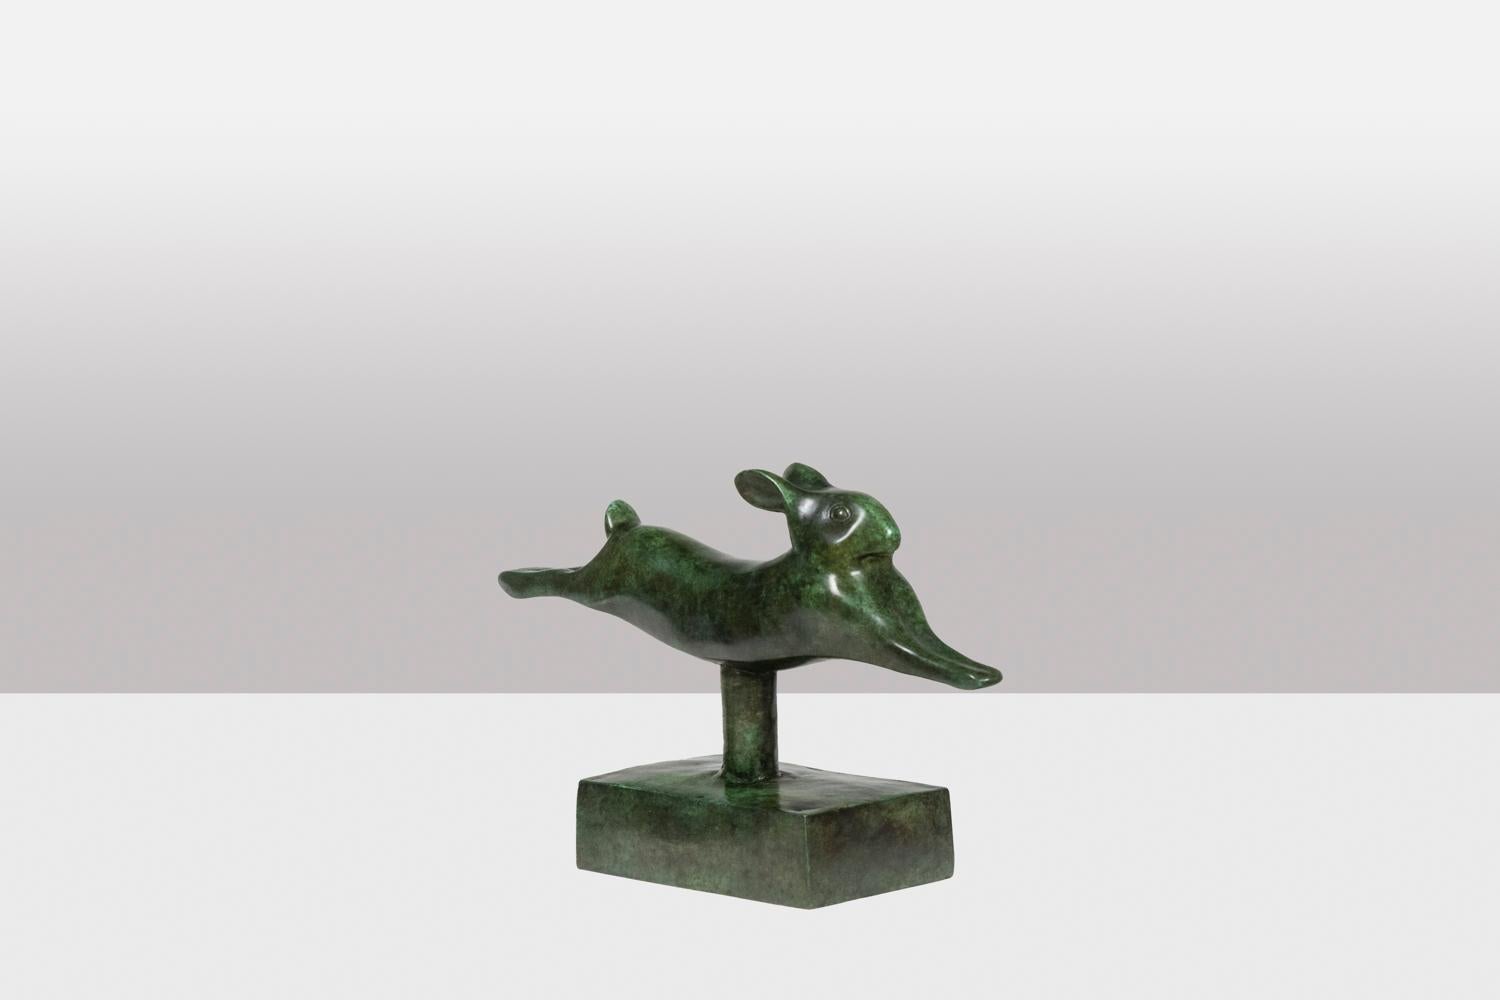 François Pompon.
Atelier Valsuani, edited by.

Sculpture titled “Lapin courant”. Bronze with green patina, lost wax casting.

Stamp of the Foundry “cire perdue C. Valsuani”, on the base of the terrace. Reproduction dated 2006. Numbered